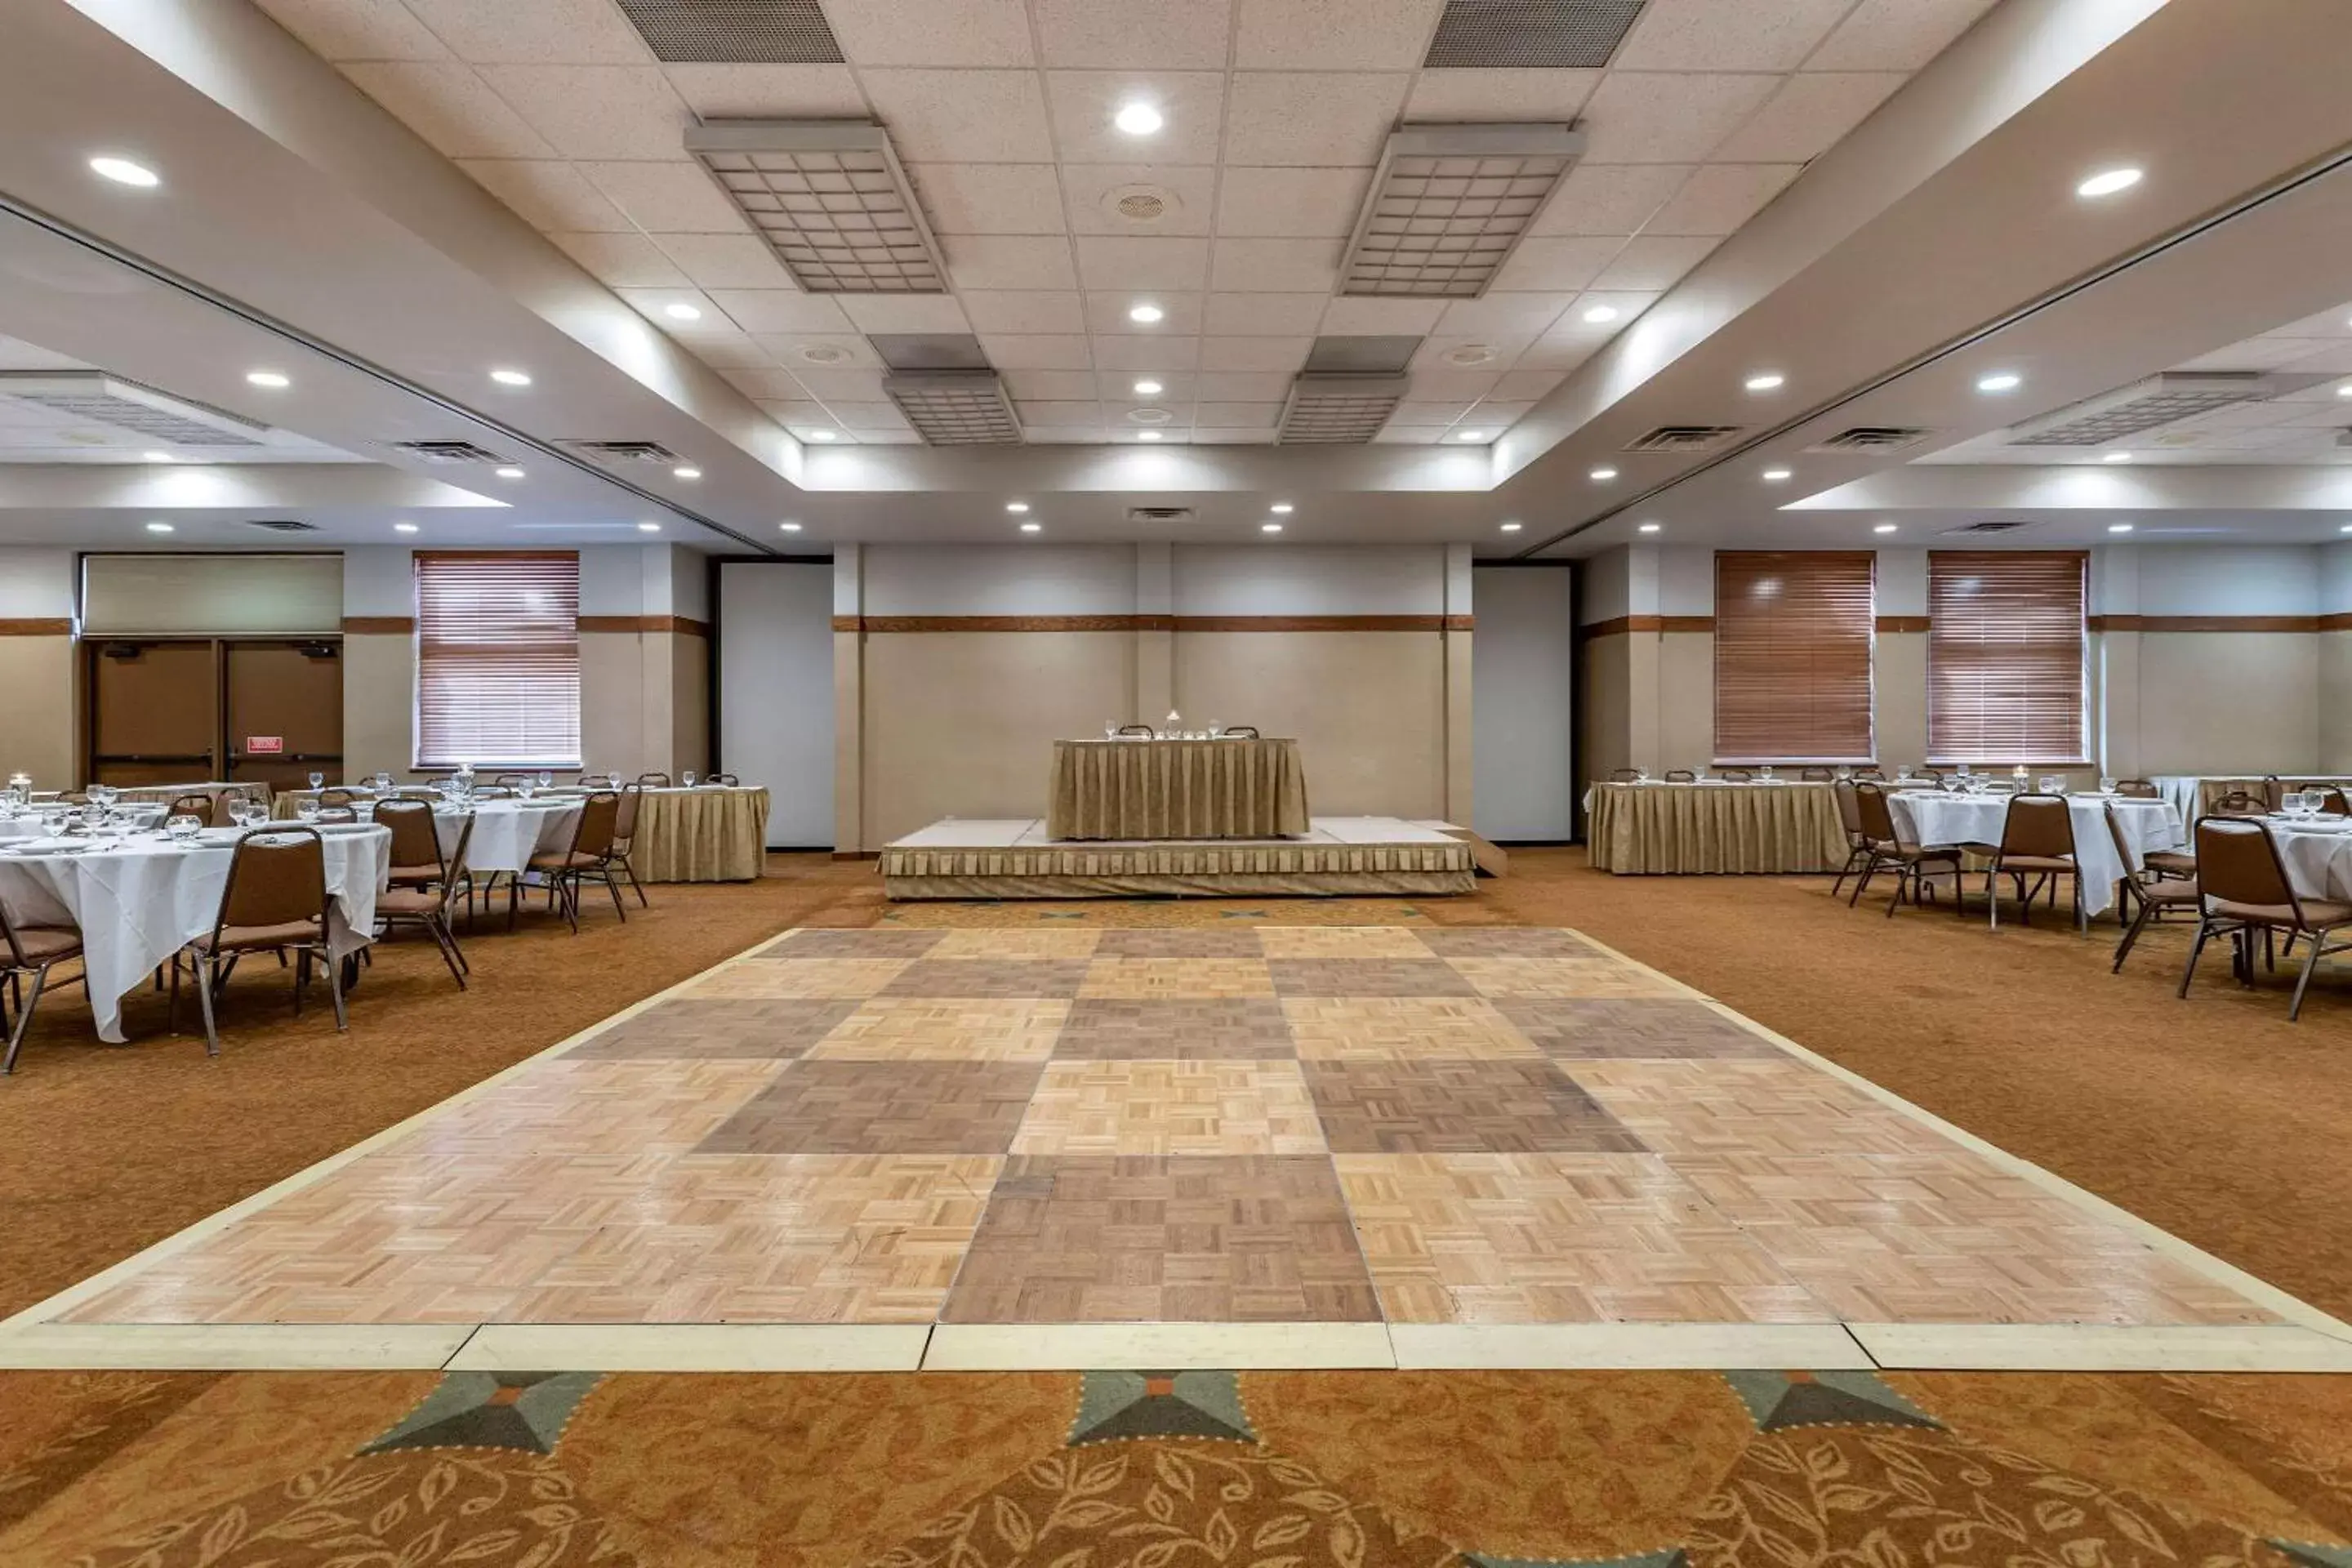 On site, Banquet Facilities in Comfort Inn Okemos - East Lansing